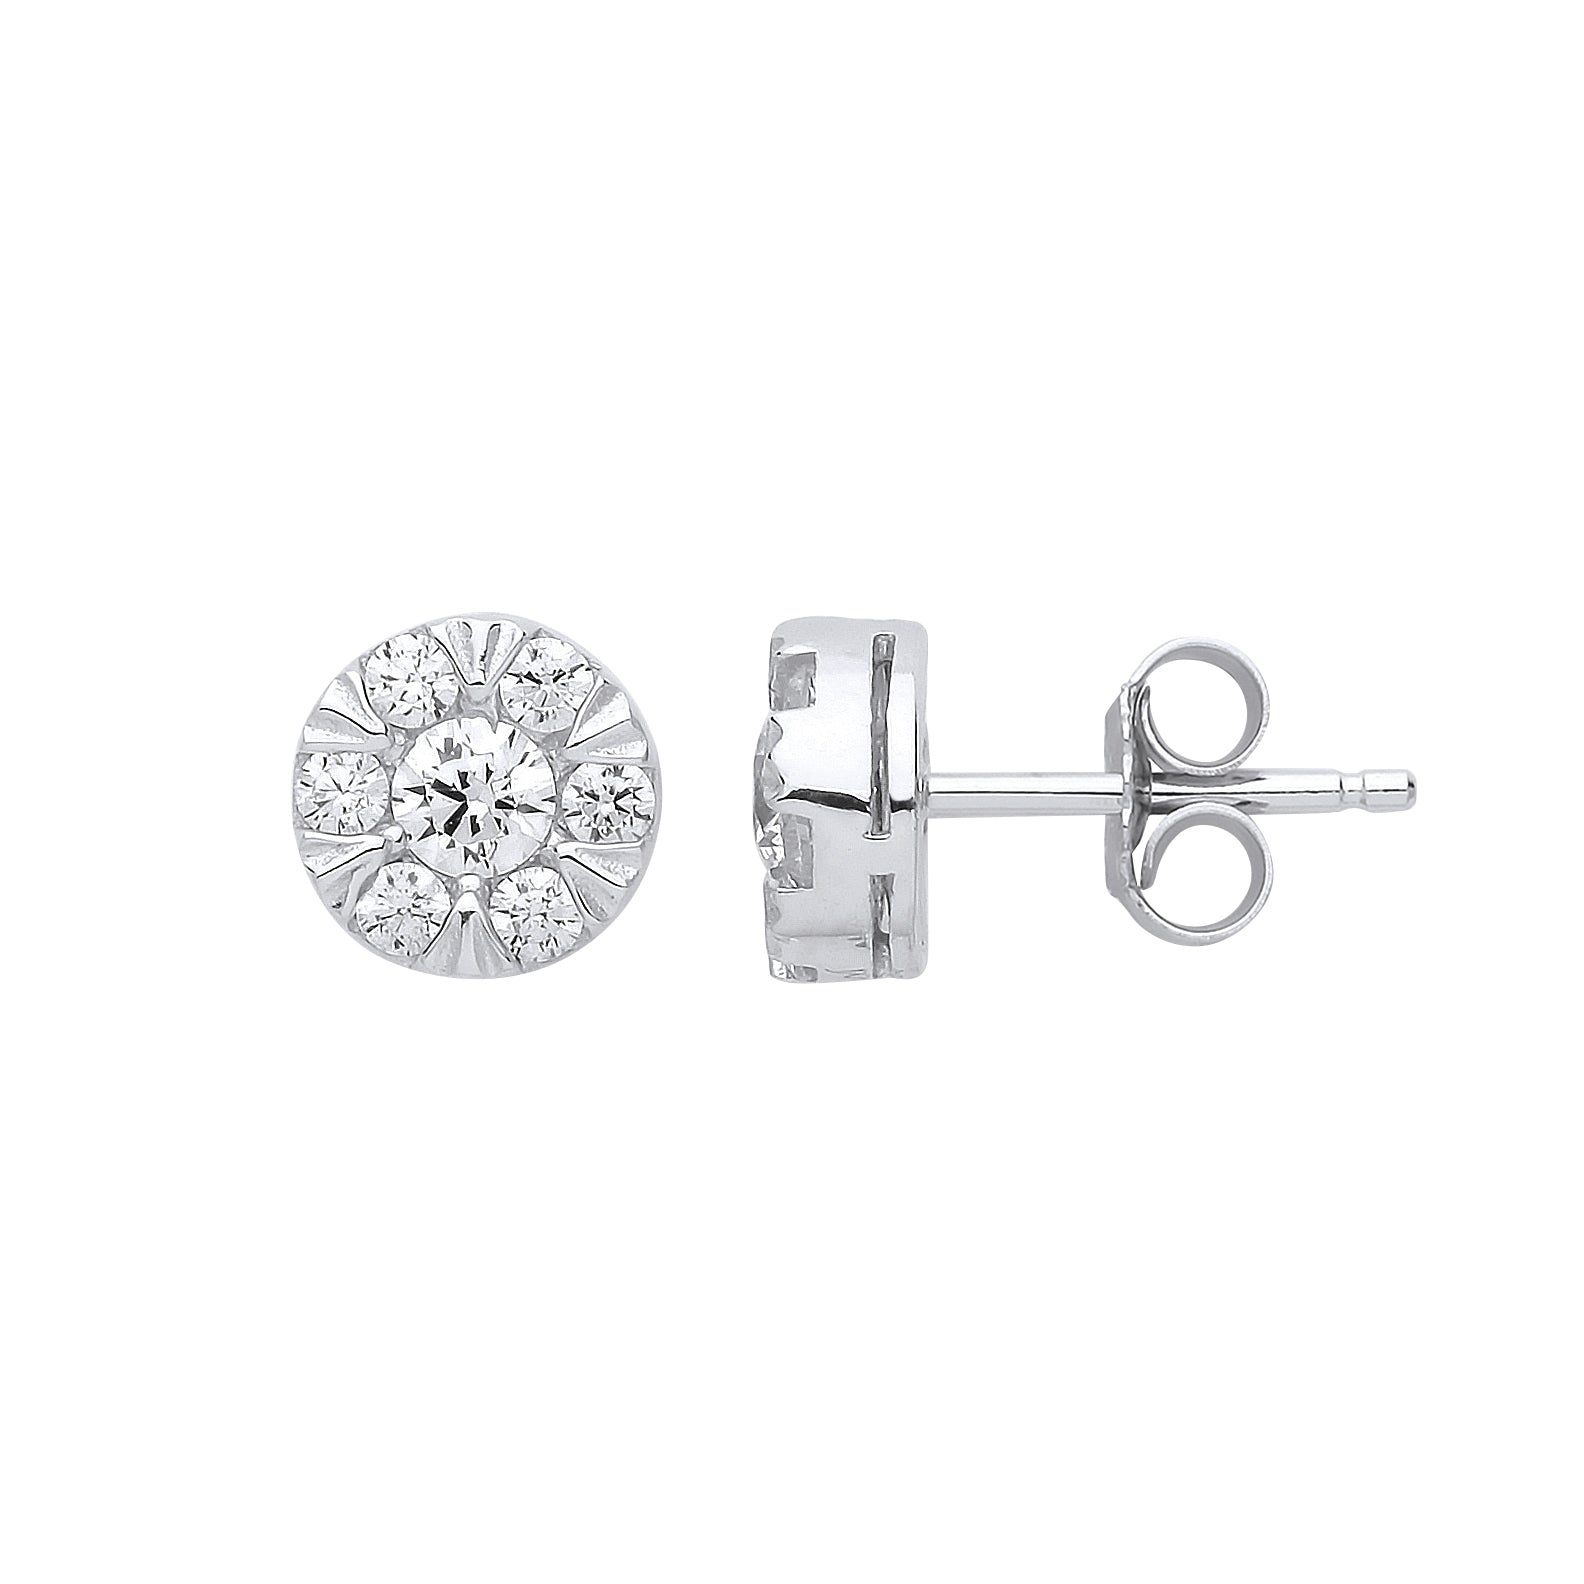 Silver  CZ Solitaire Cluster Stud Earrings - GVE818